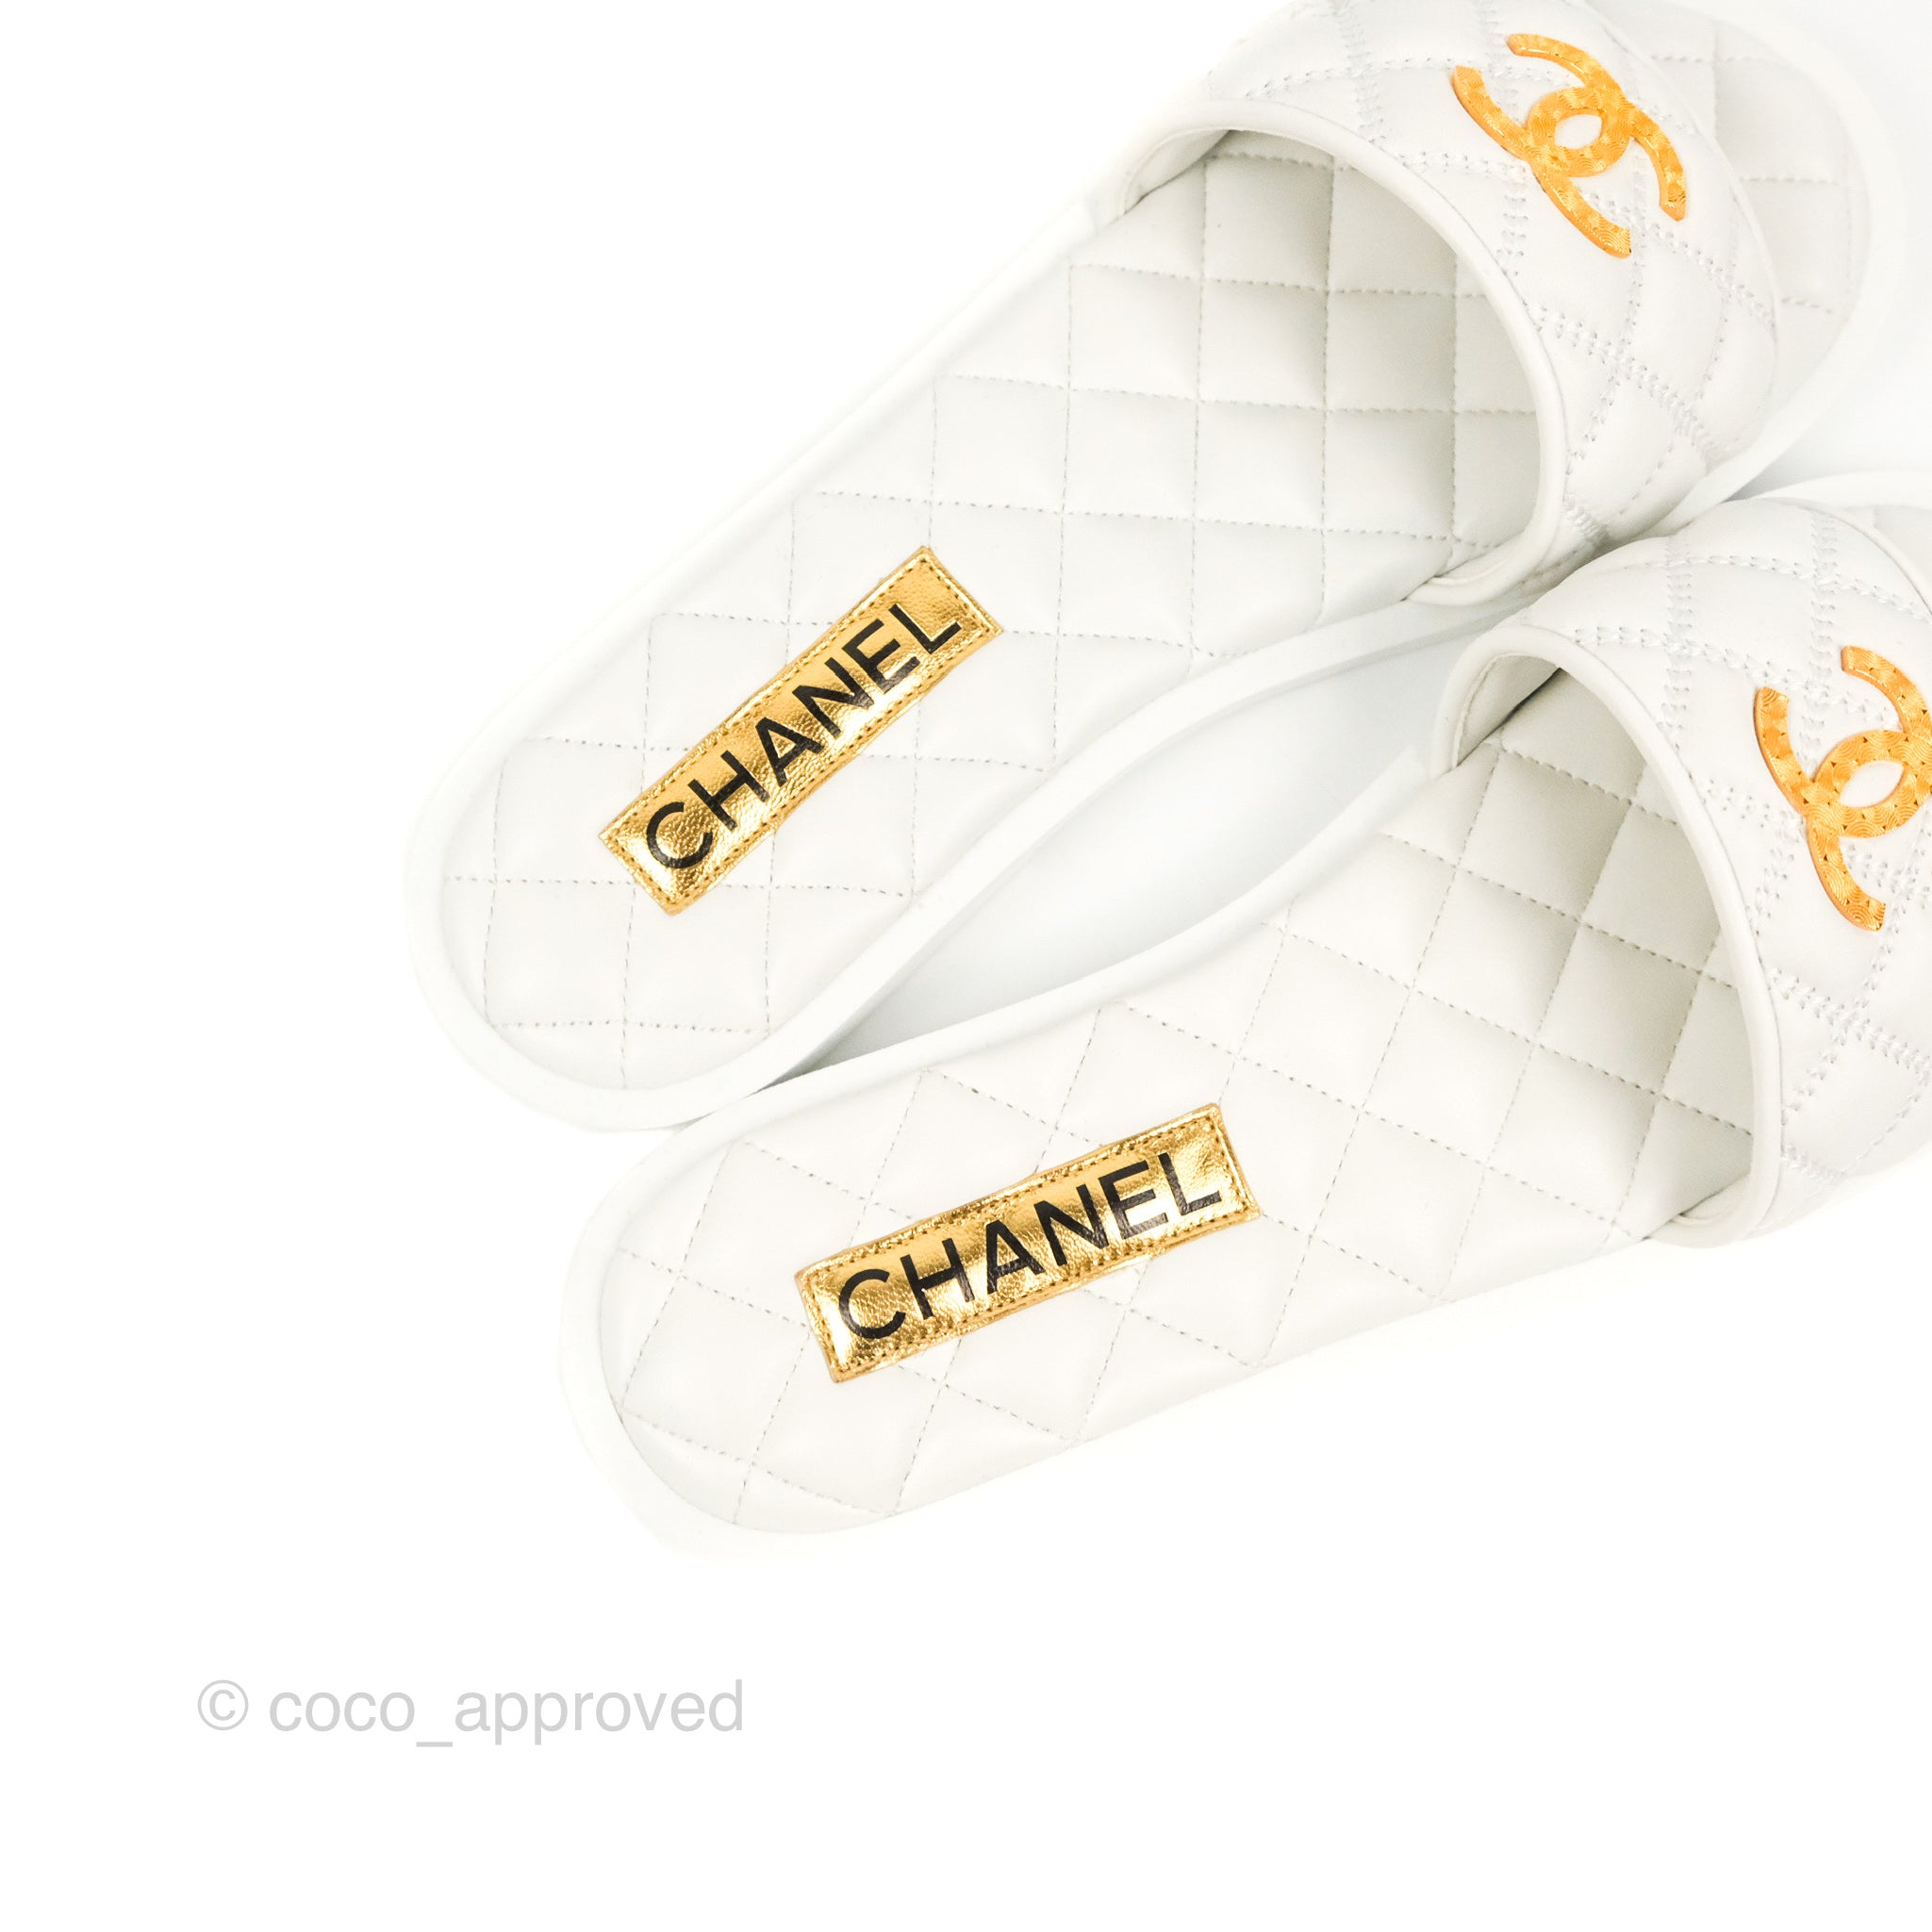 Chanel White Slippers – Coco Approved Studio